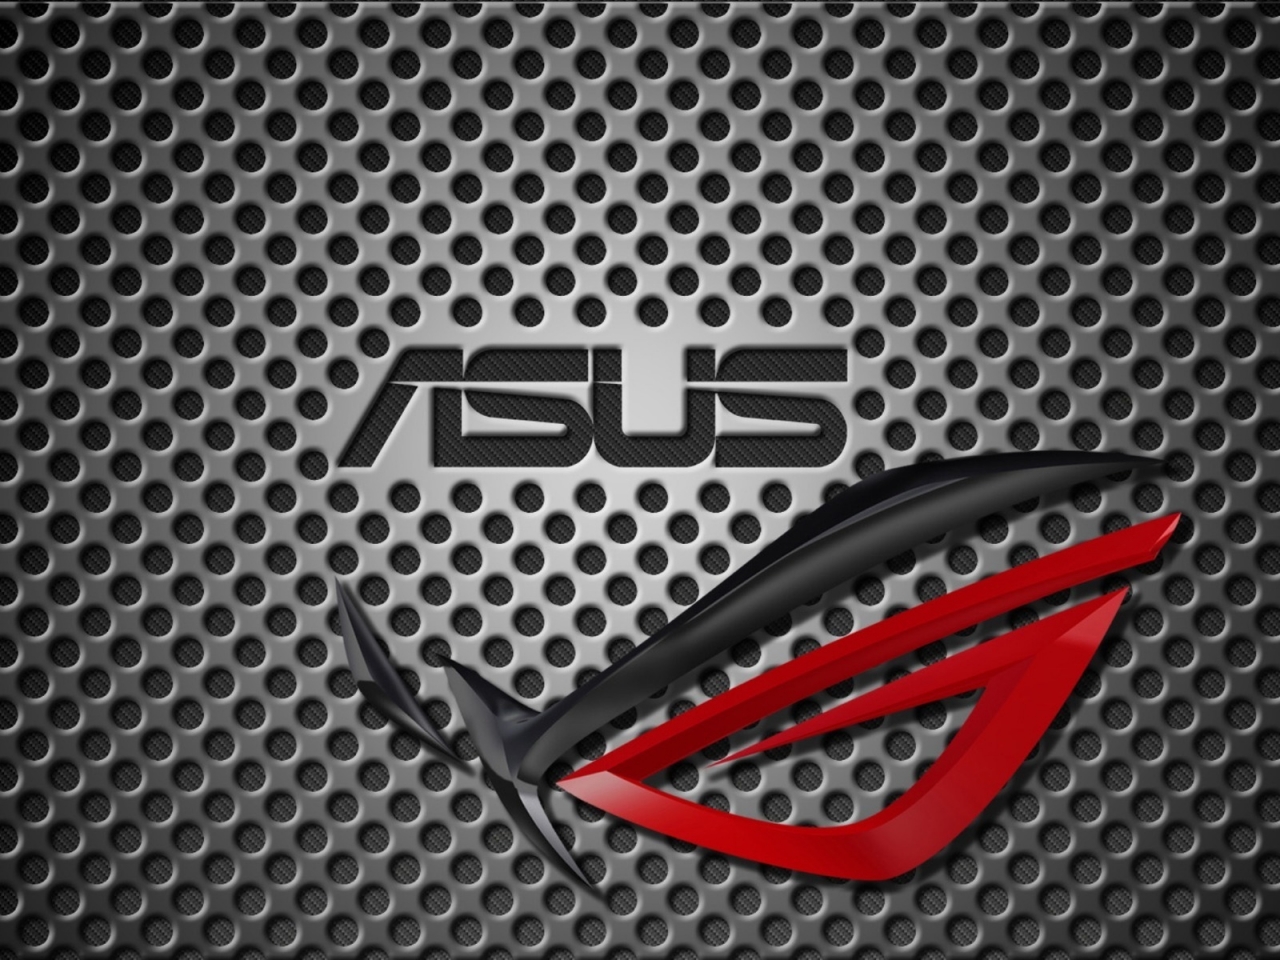 Asus Computer for 1280 x 960 resolution